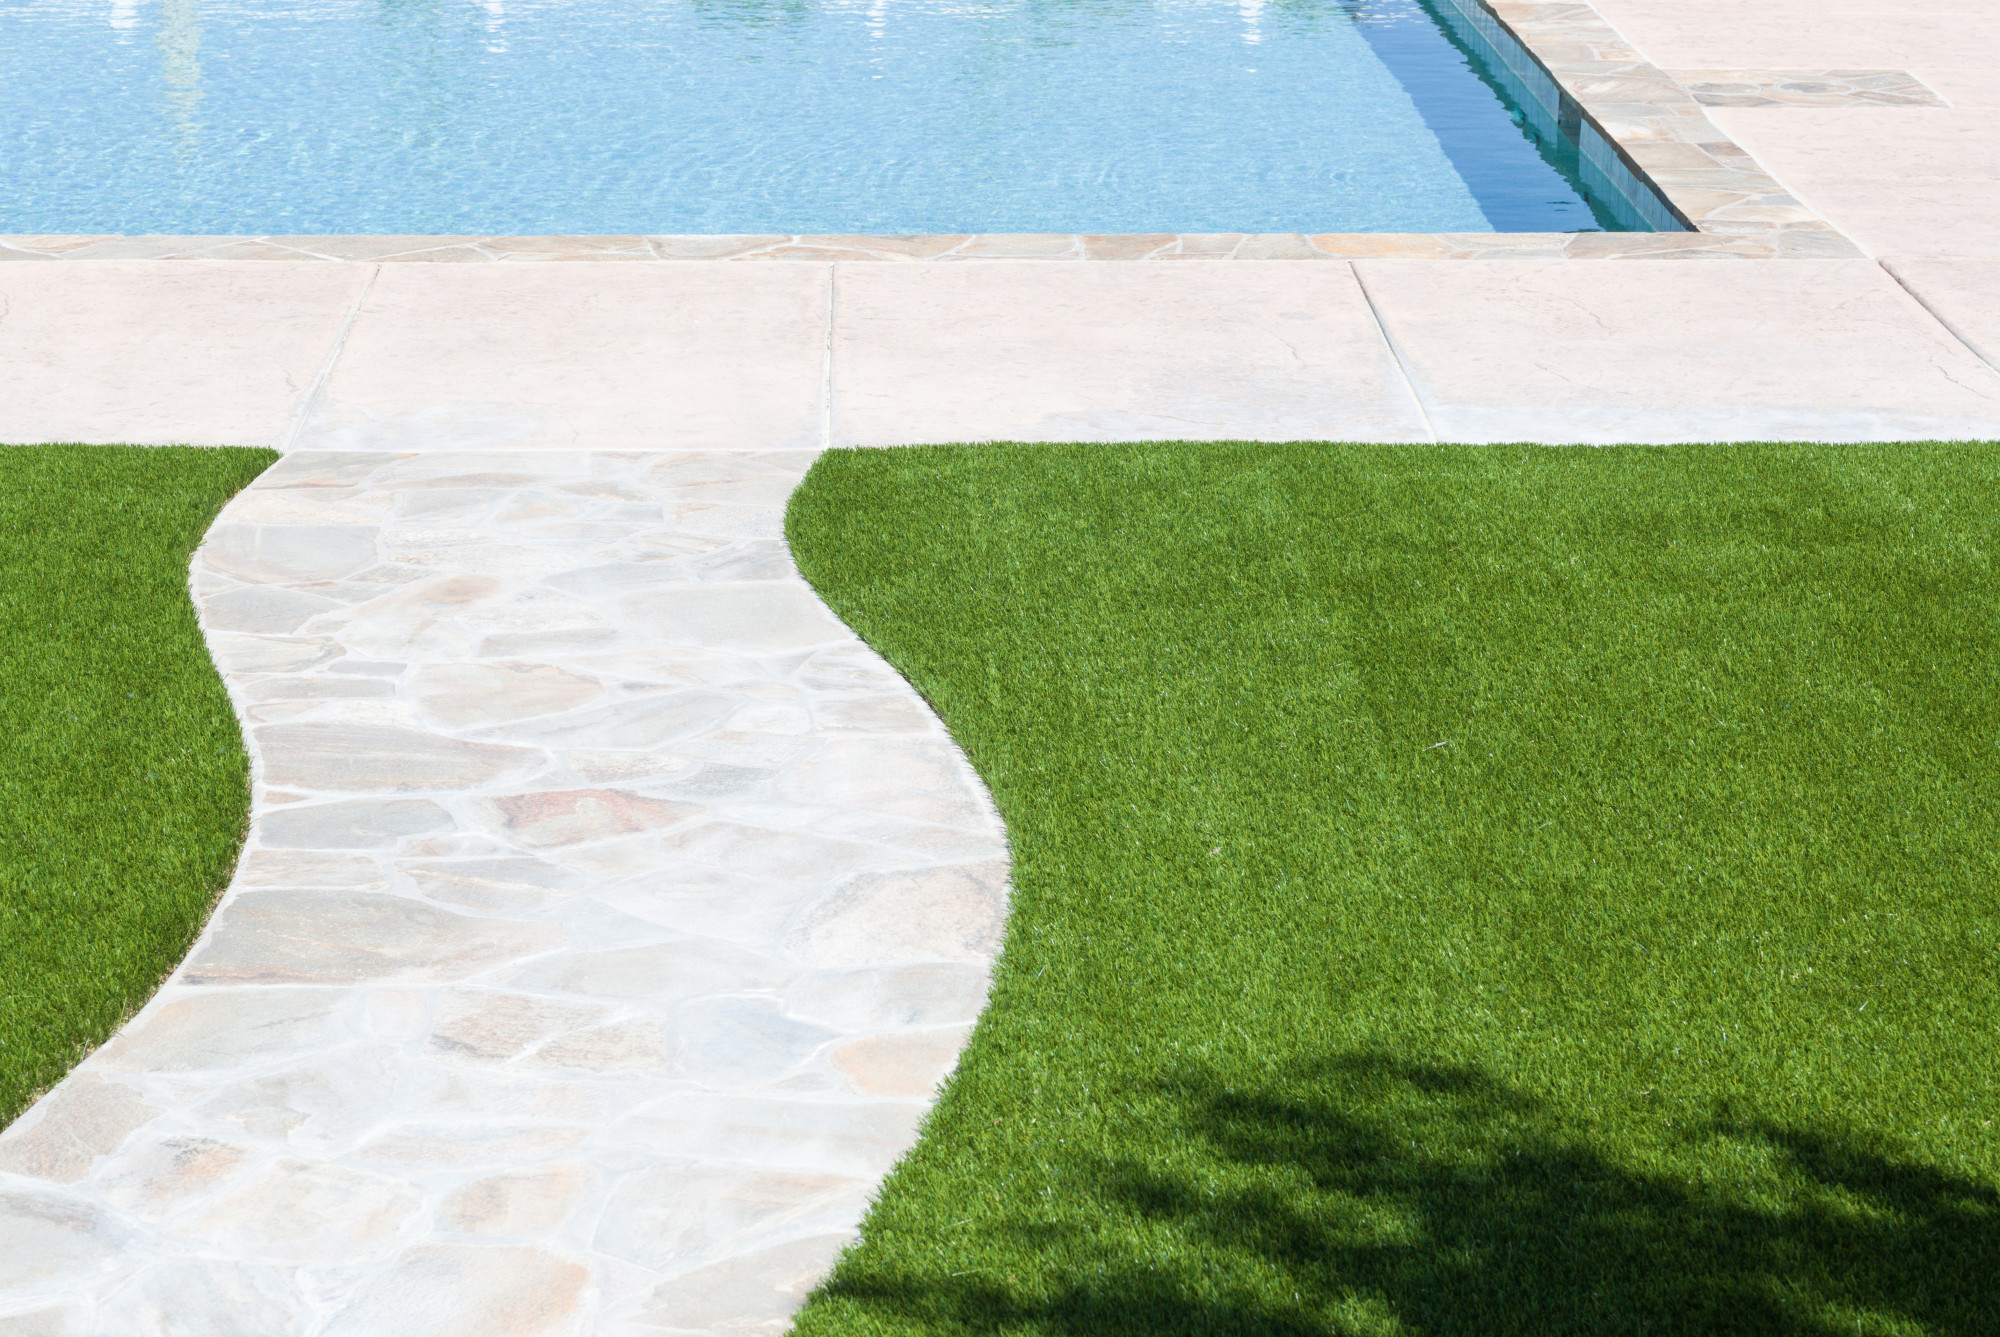 Turfing Lawns: 7 Key Benefits of Synthetic Turf